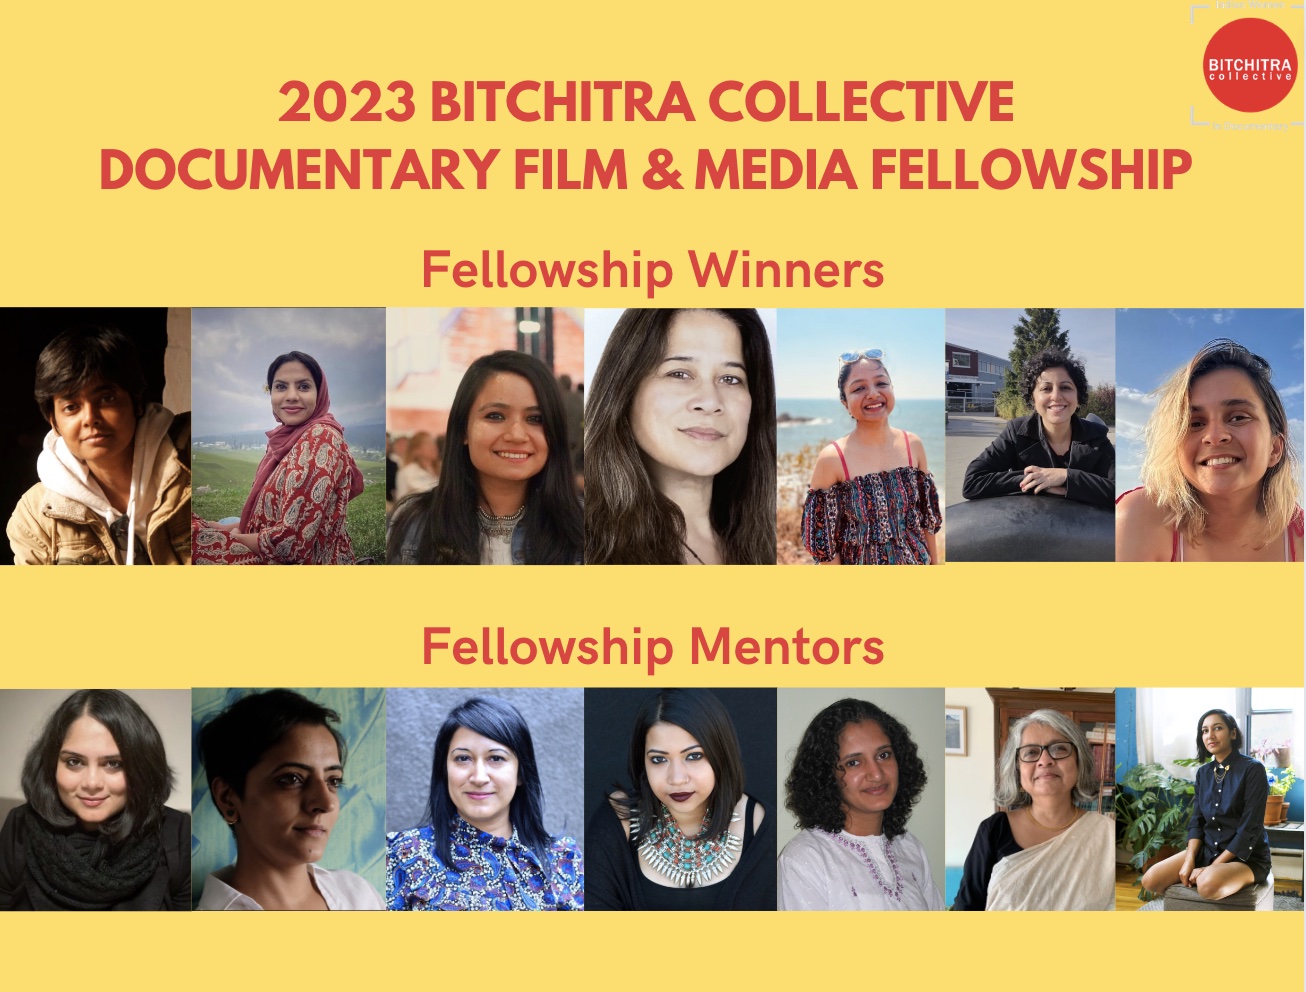 Image featuring the headshots of the seven fellowship winners and mentors of the 2023 Bitchitra Collective Documentary Film & Media Fellowship.